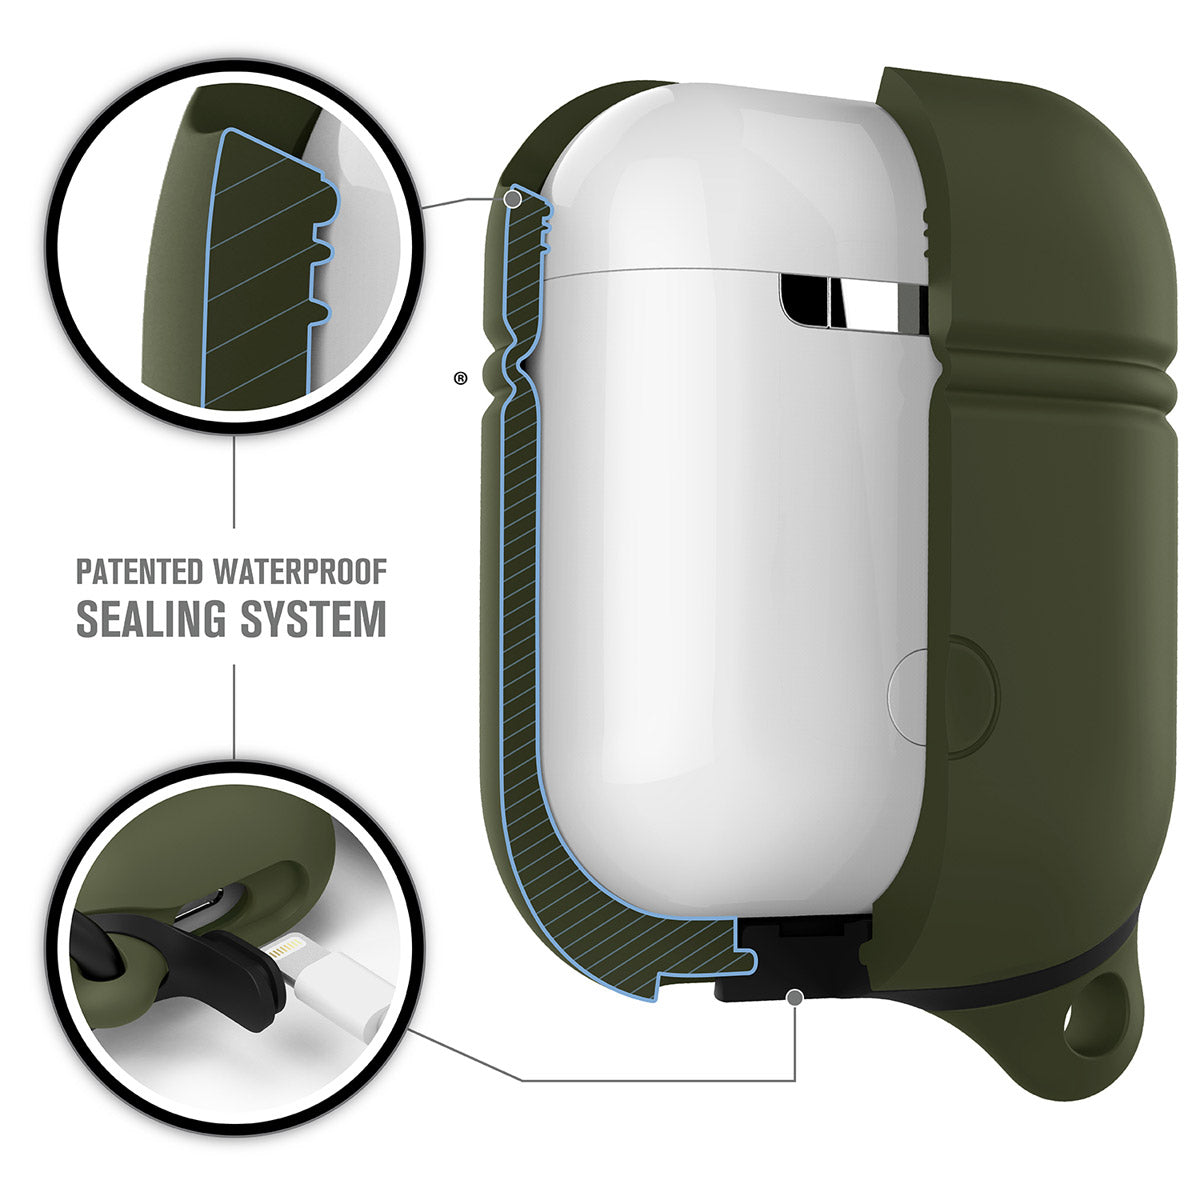 CATAPDGRN-FBA | Catalyst airpods gen2/1 waterproof case + carabiner showing the inner materials of the case in army green text reads patented waterproof sealing system